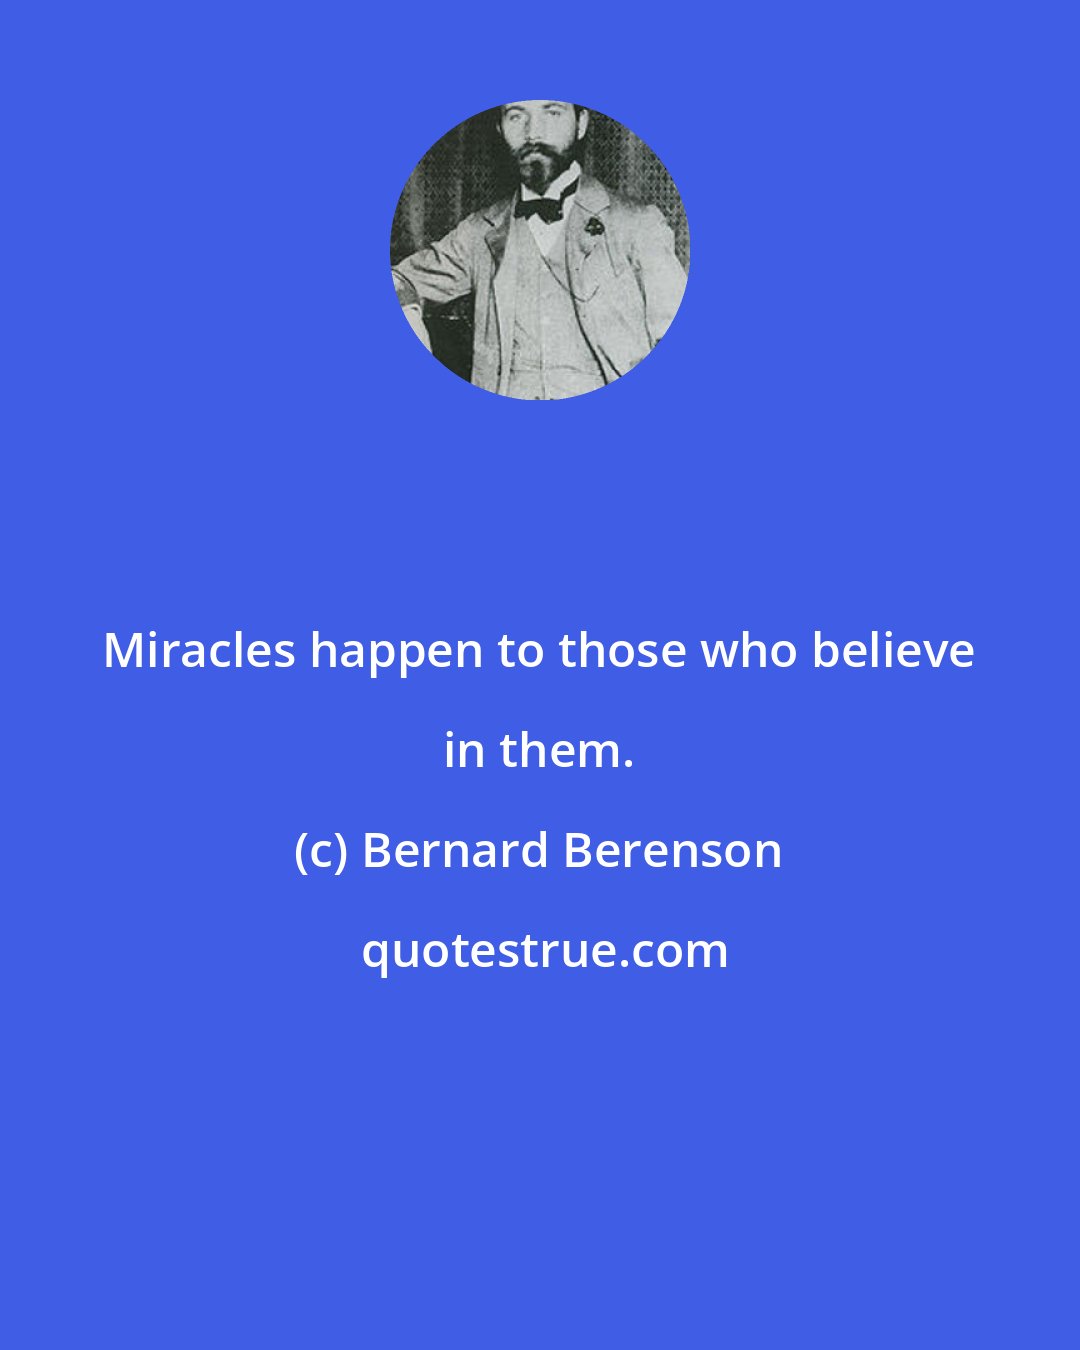 Bernard Berenson: Miracles happen to those who believe in them.